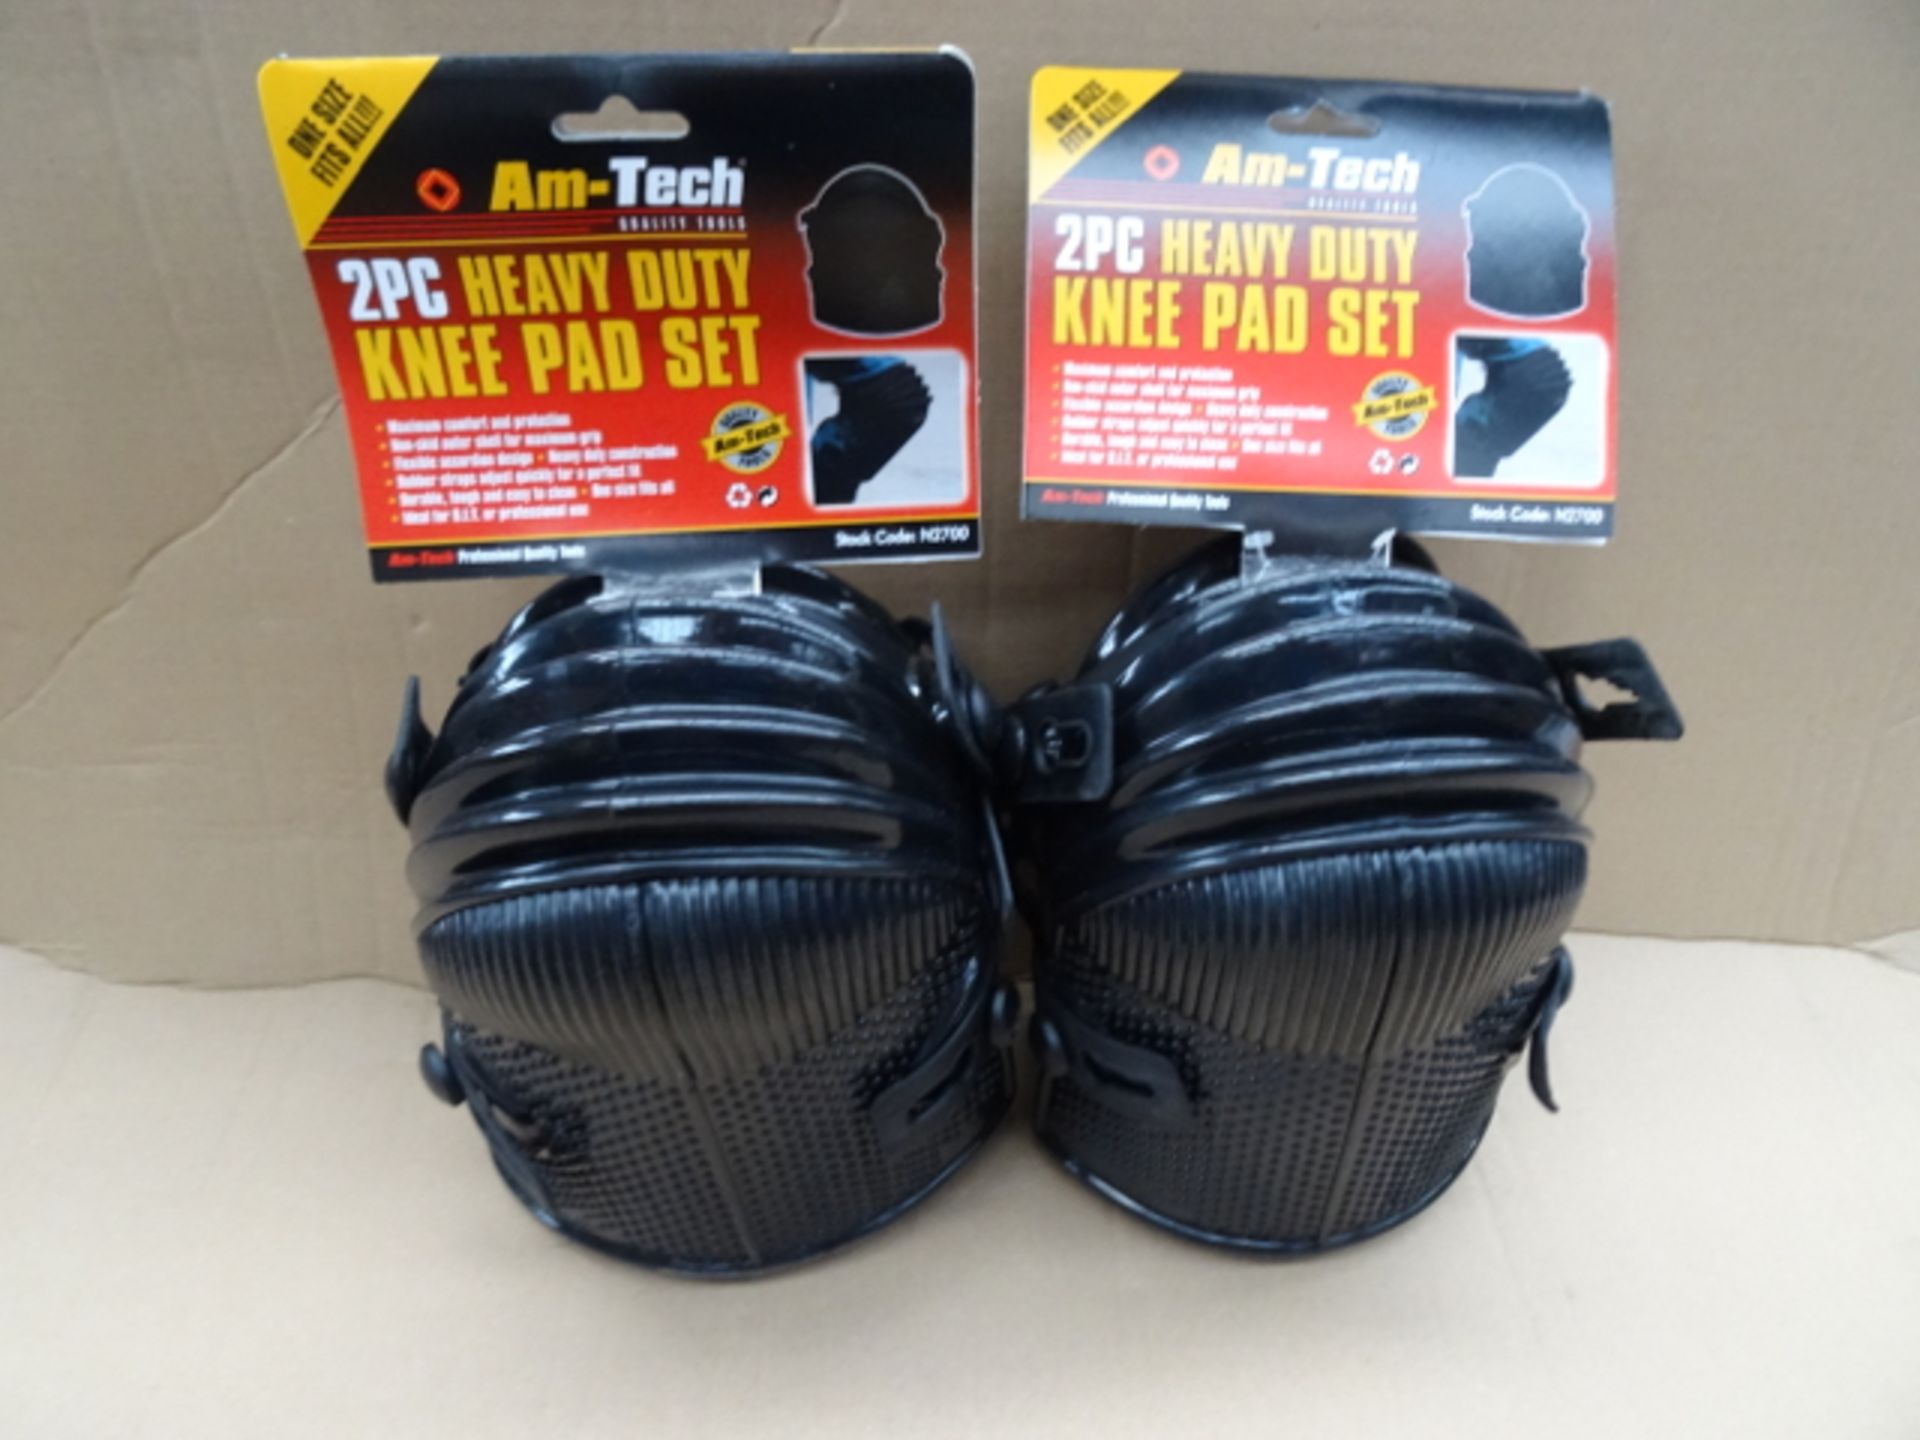 20 x Am-Tech Quality Tools. 2 Piece Heavy Duty Knee Pad Set. One Size fits all. Very high quality! - Image 4 of 4